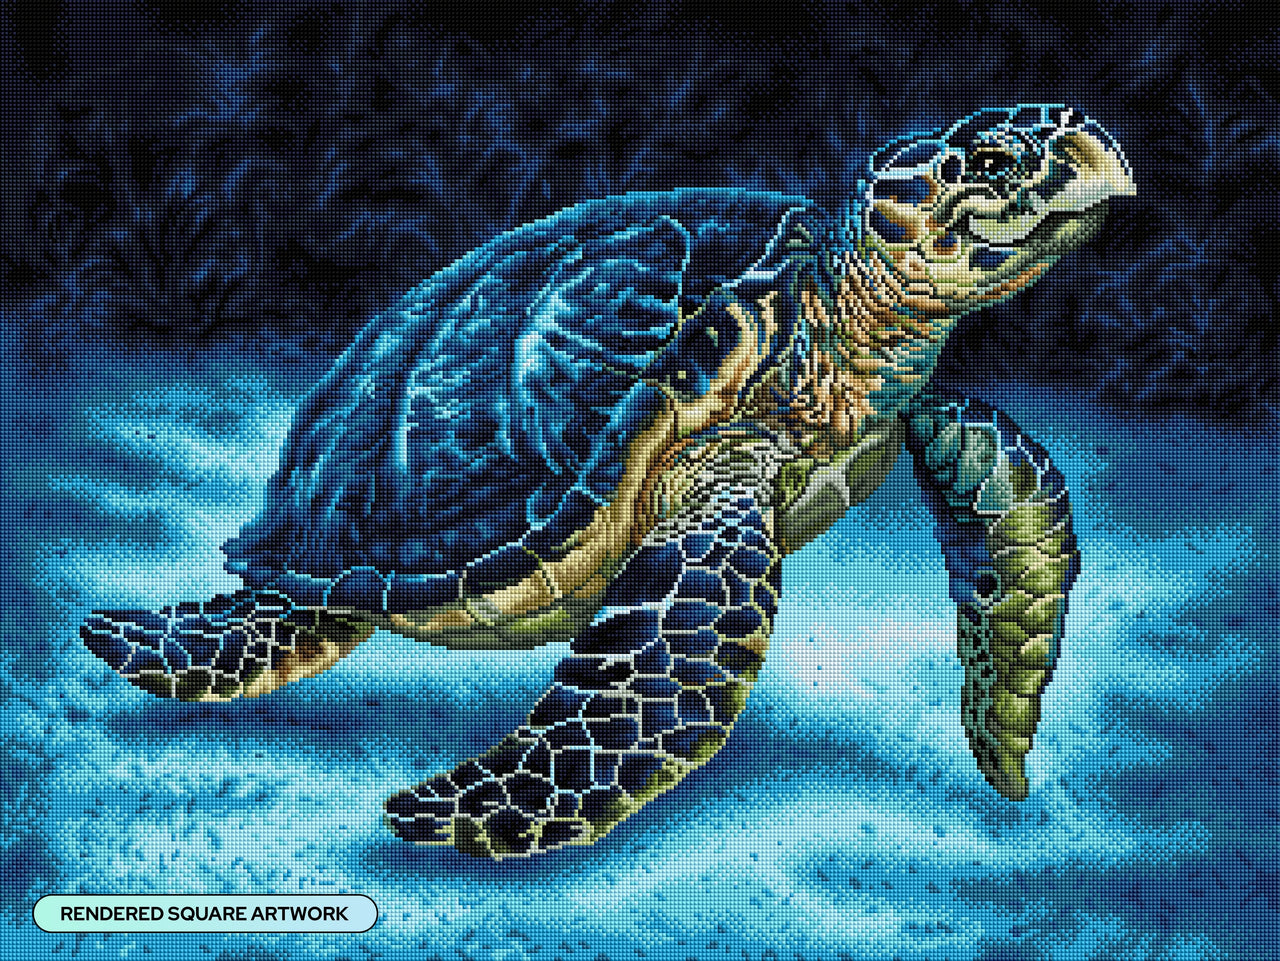 Diamond Painting Smiling Sea Turtle 31.5" x 23.6" (80cm x 60cm) / Square with 46 Colors including 2 ABs and 2 Fairy Dust Diamonds / 77,361